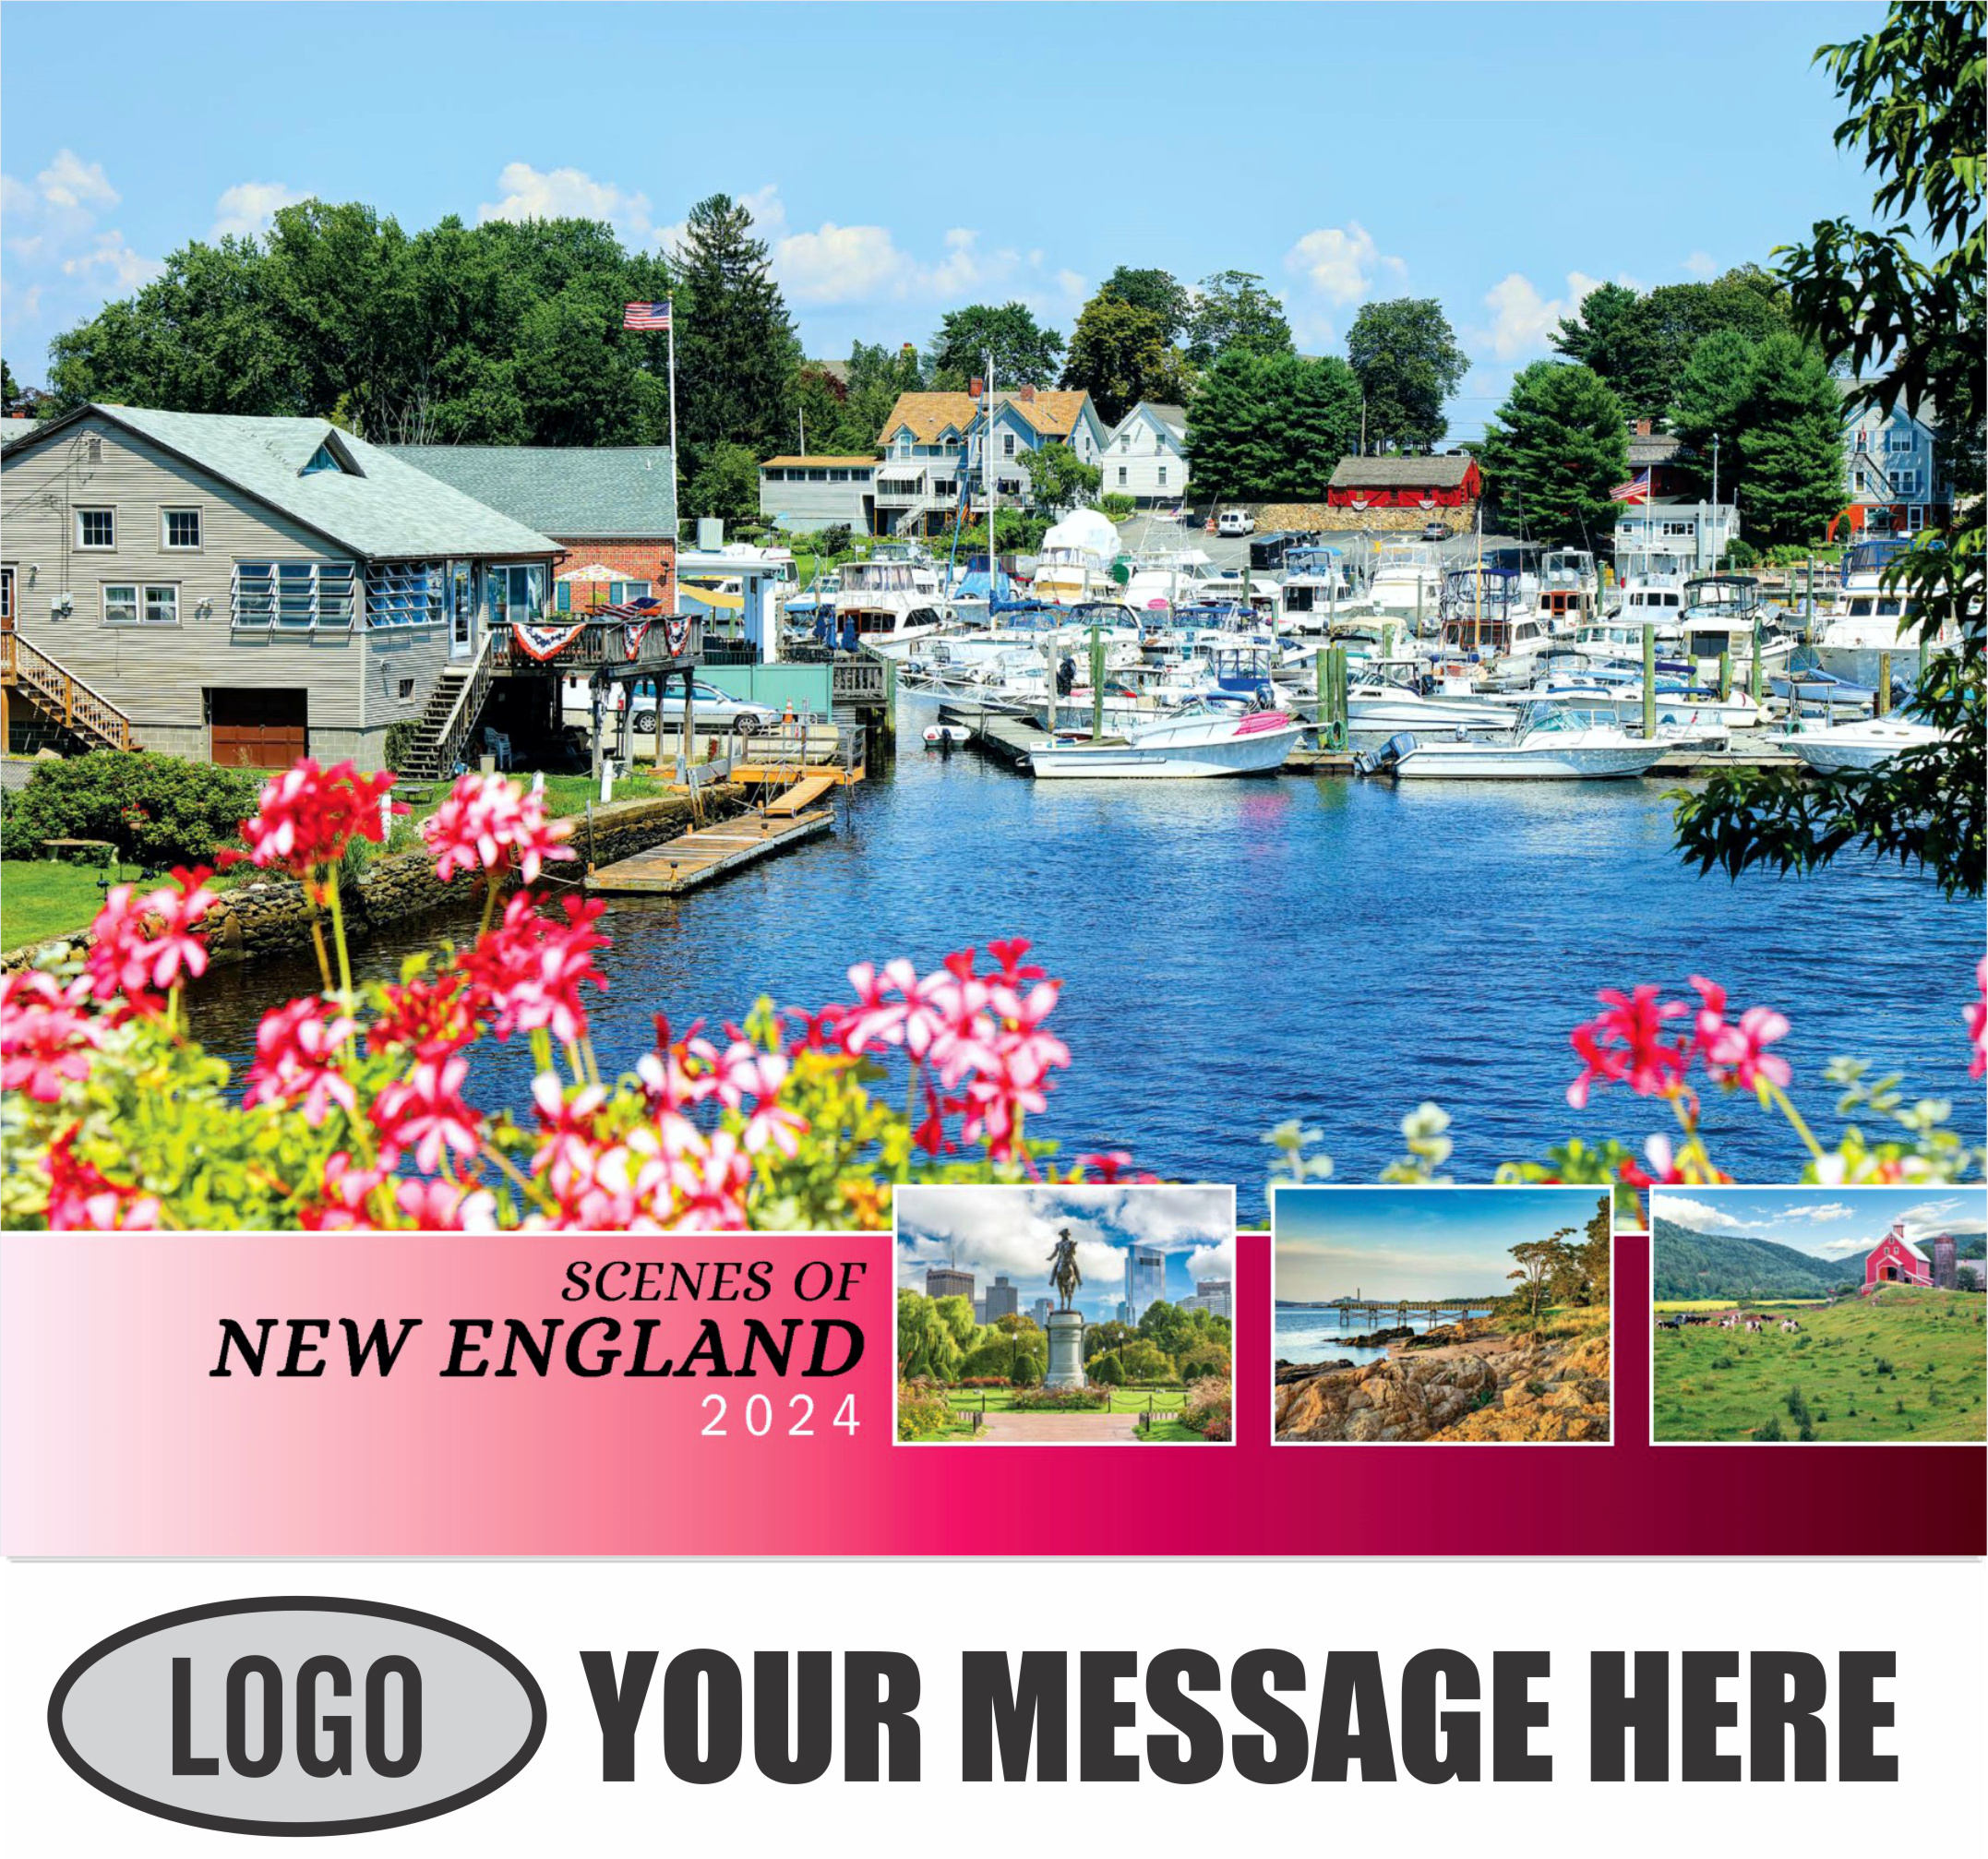 Scenes of New England 2024 Business Advertising Wall Calendar - cover